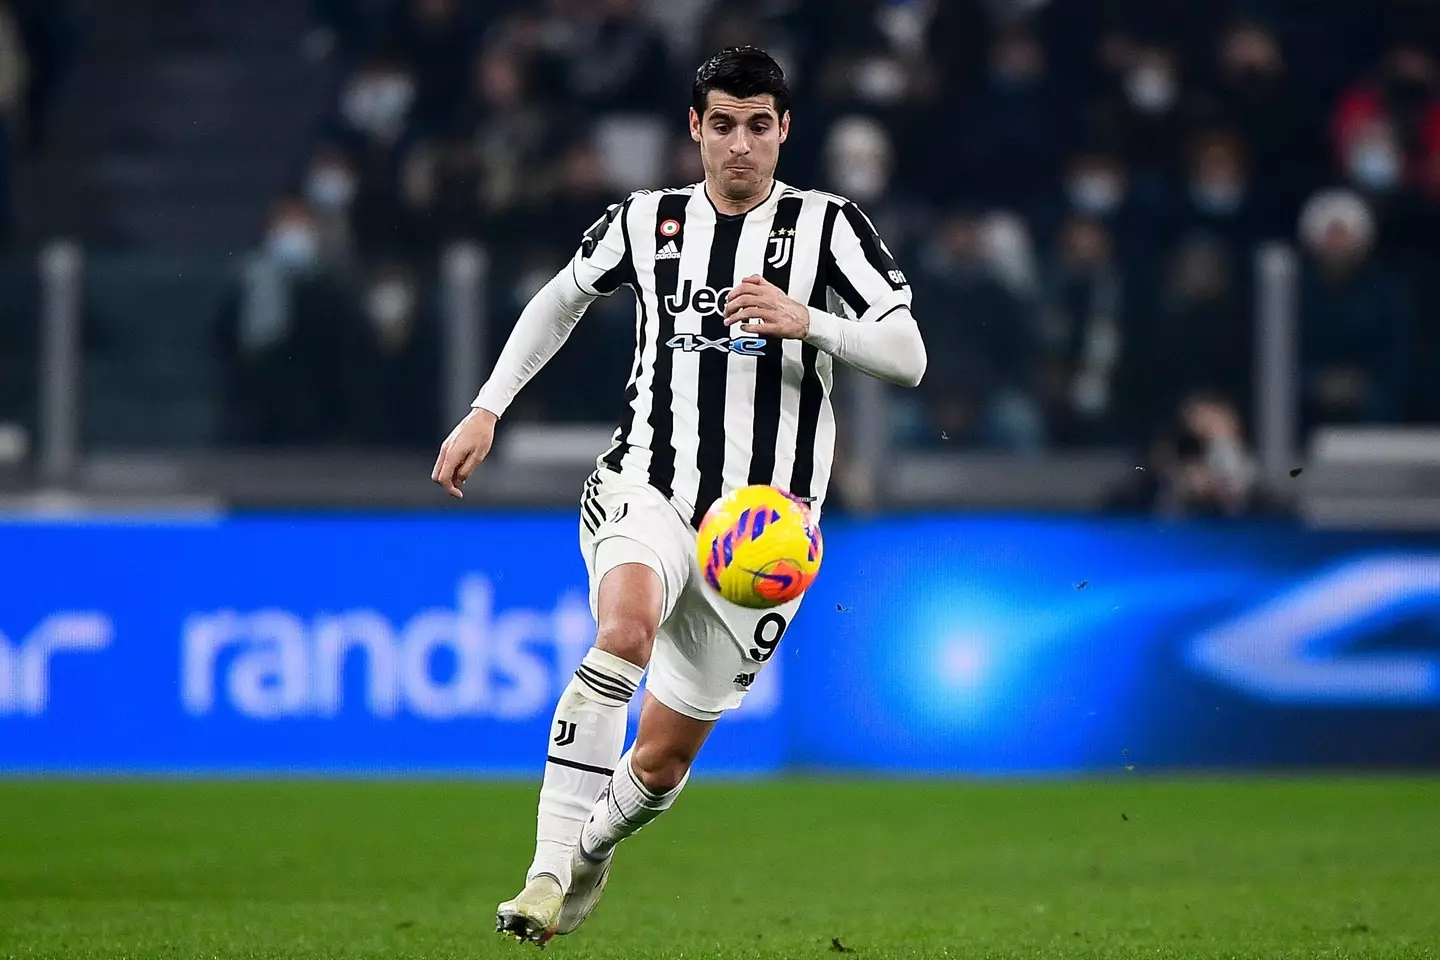 Morata is currently on loan at Juventus from Atletico Madrid (Image: Alamy)